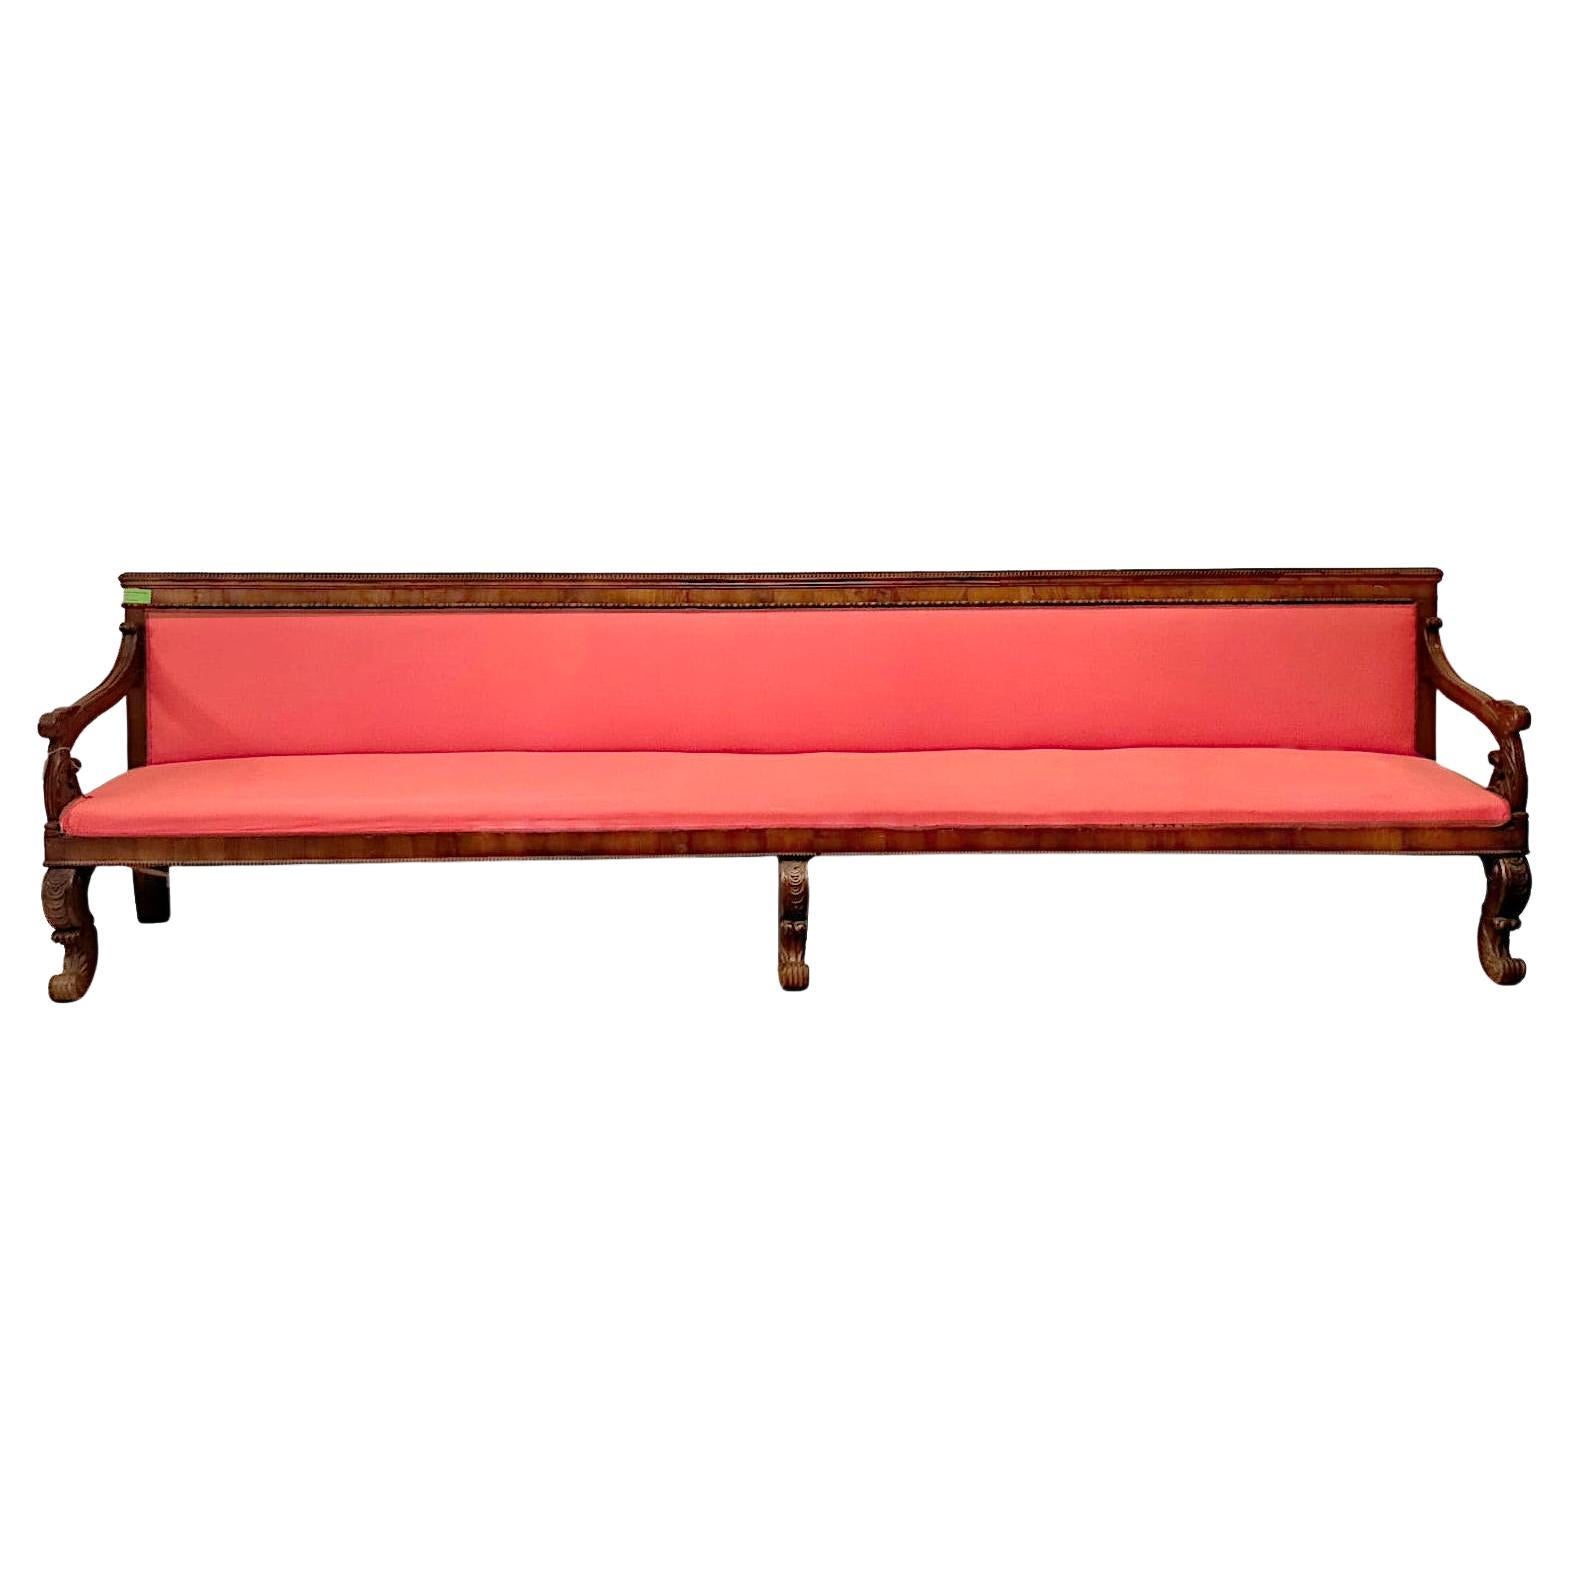 Large Roman Sofa from the 1800s from the Charles X Era For Sale